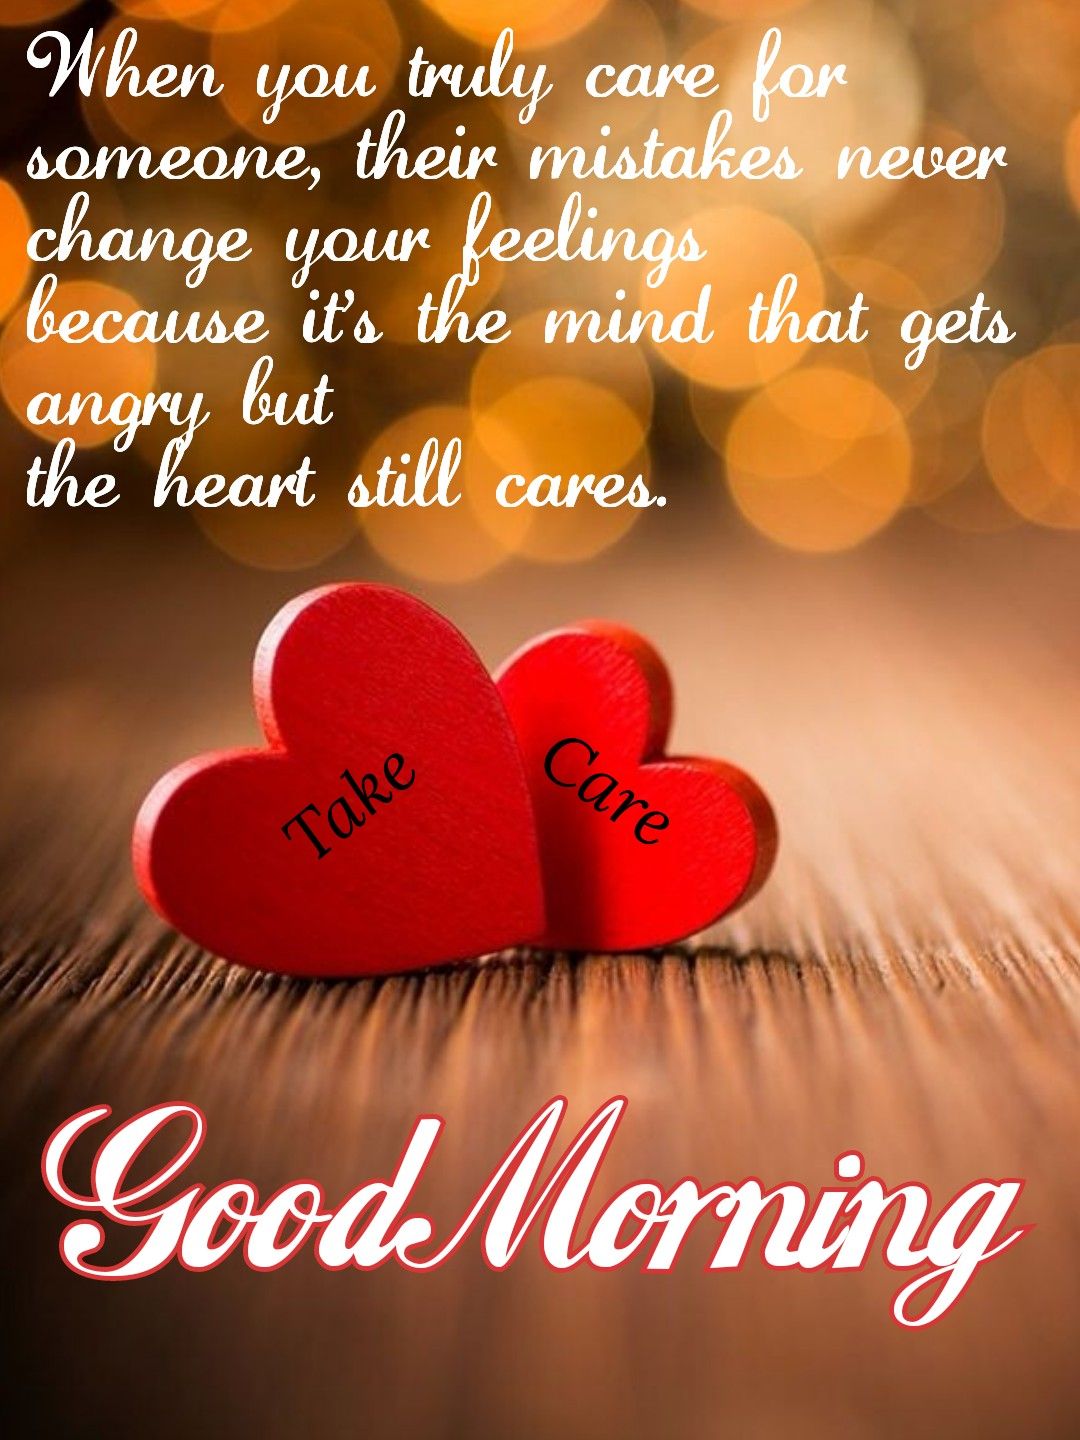 Good Morning My Love Quotes For Him or Her